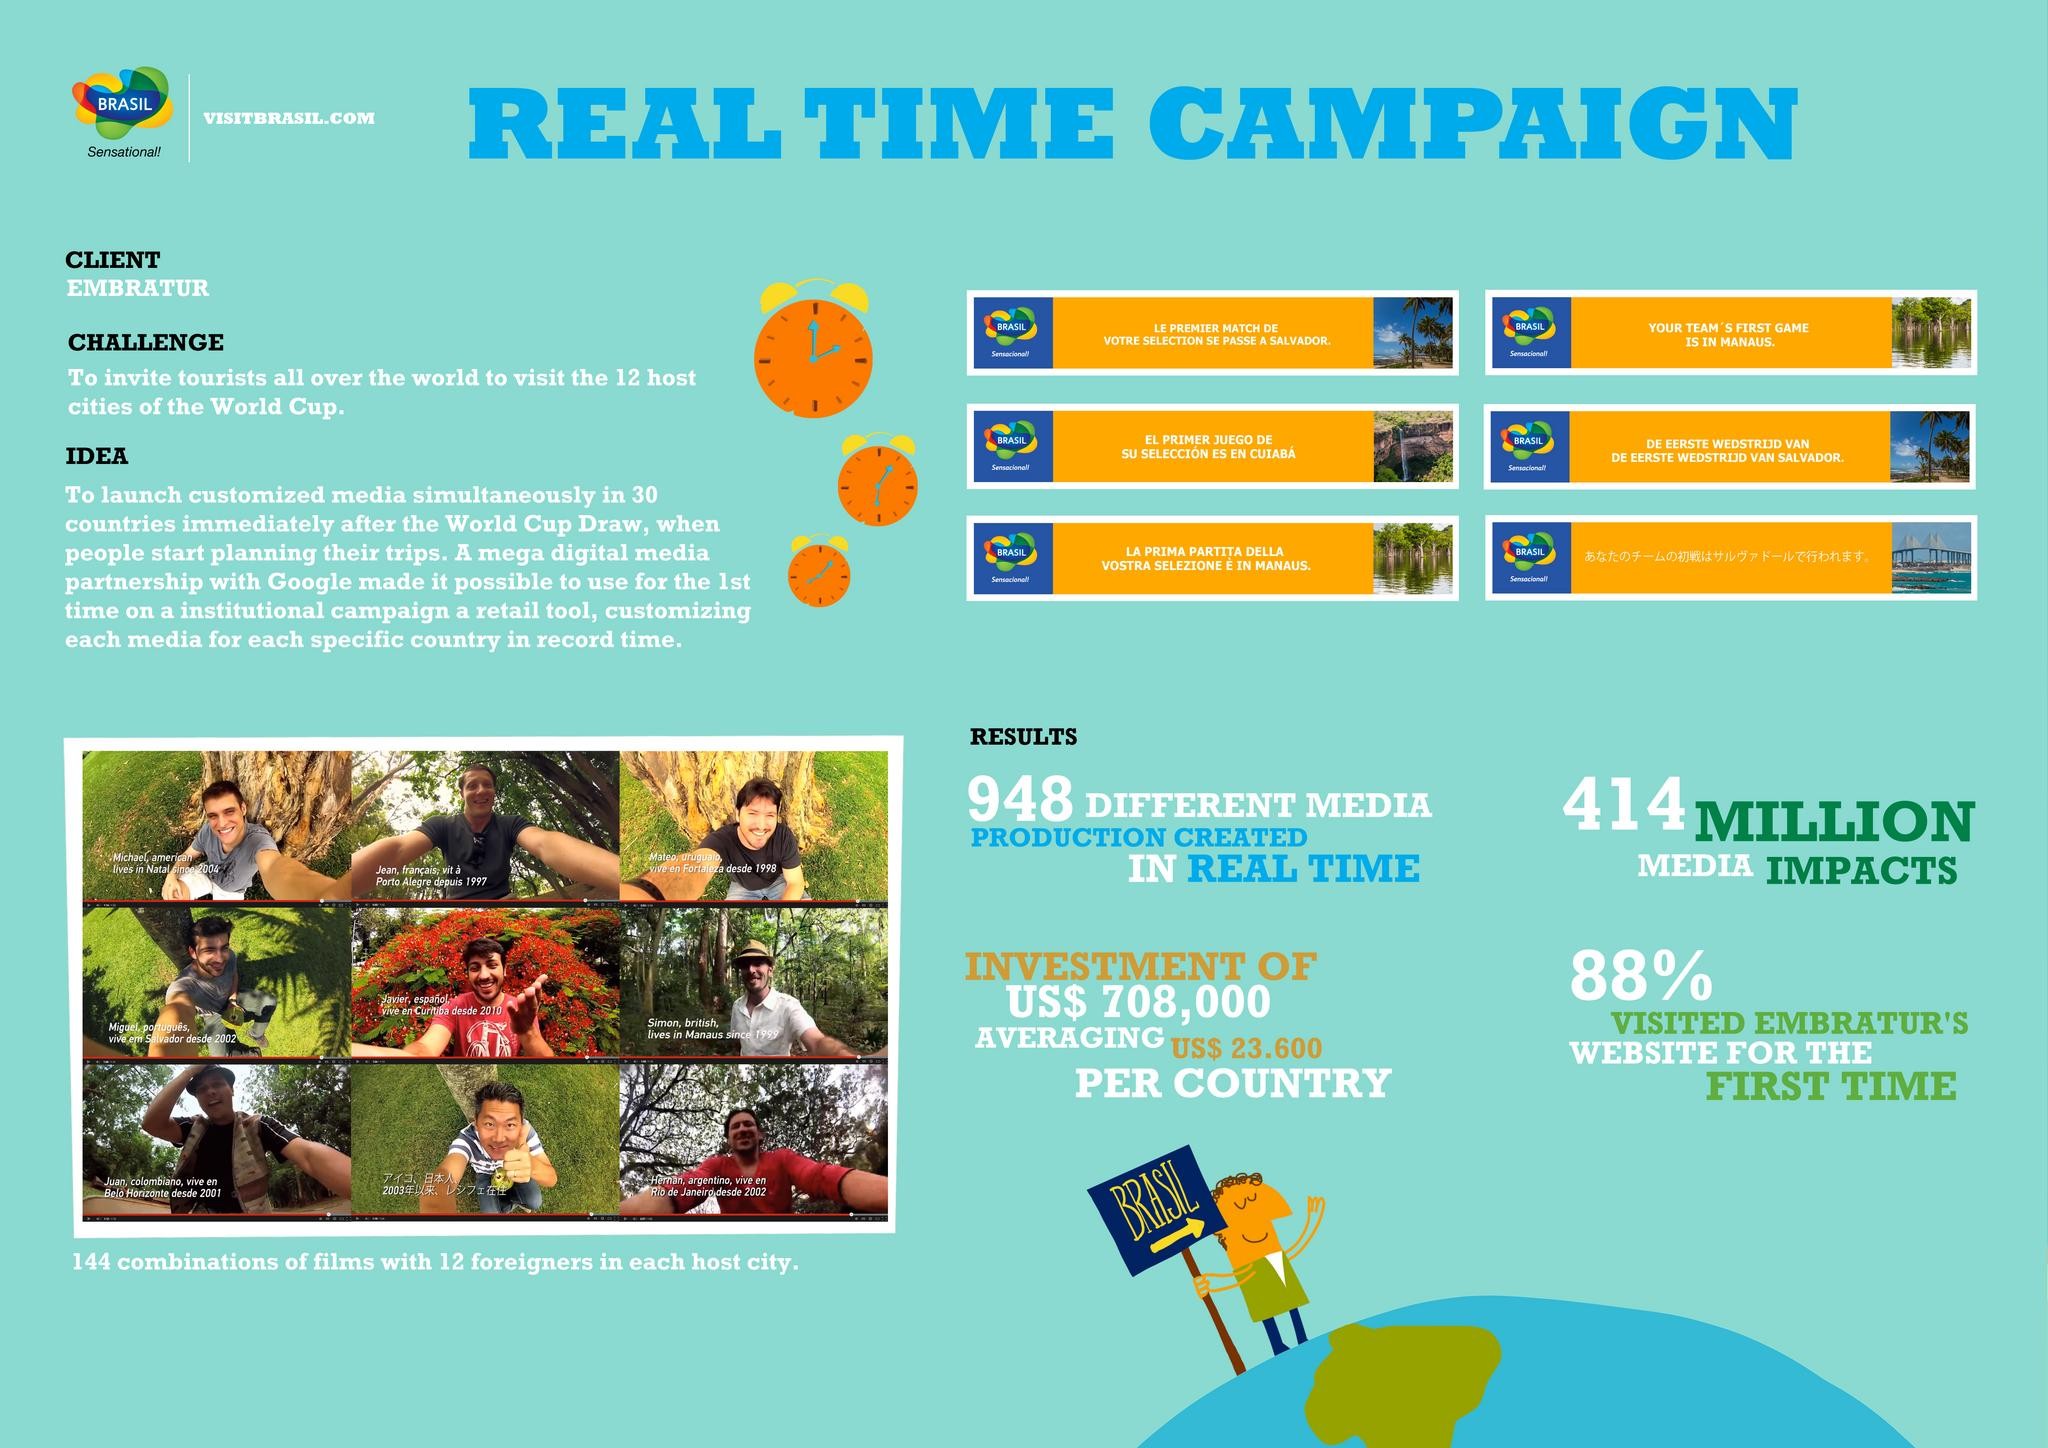 REAL TIME CAMPAIGN